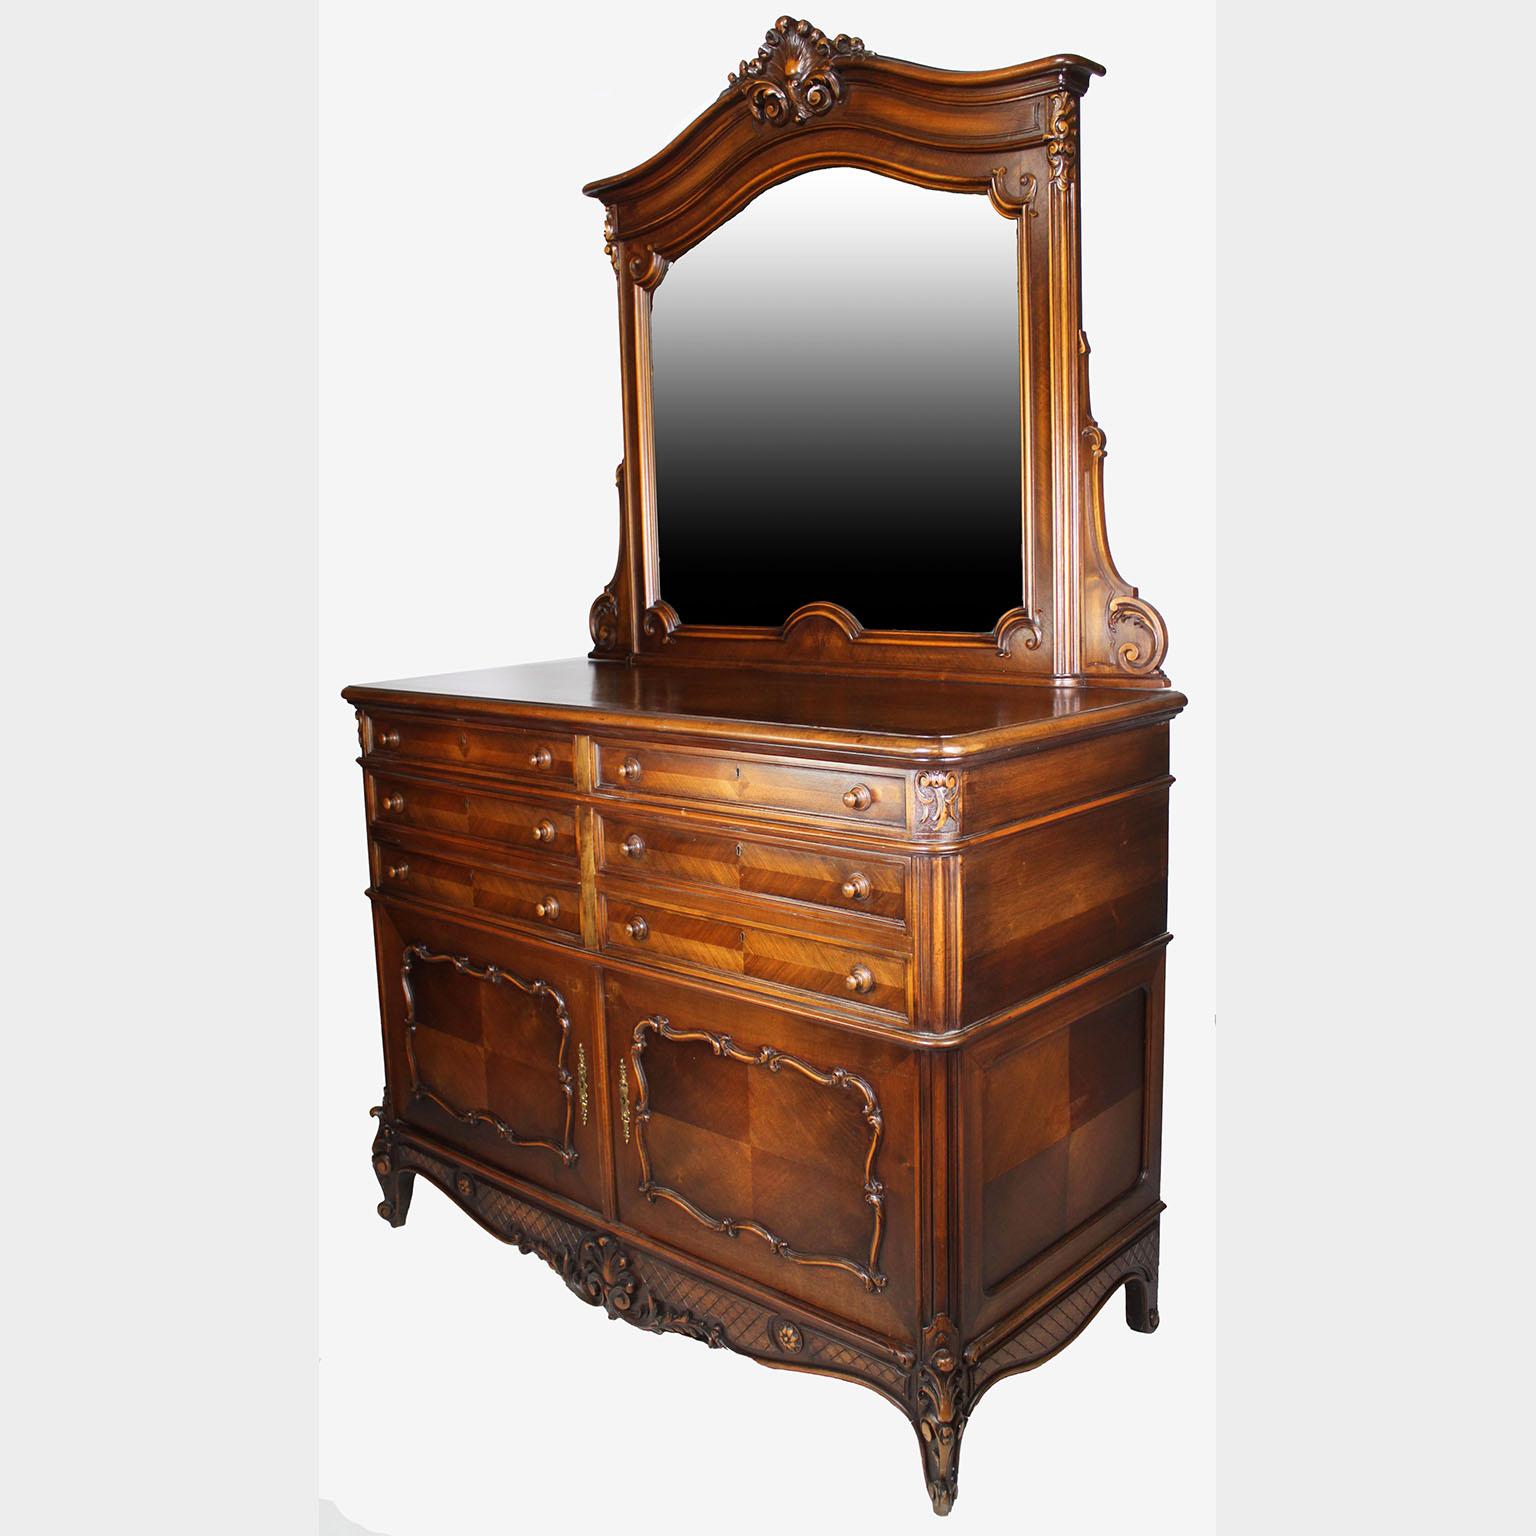 A Country French 19th/20th Century Louis XV Provençal Style Carved Walnut Vanity Dressing Table with Drawers. The large commode cabinet with six upper drawers above a twin-door compartment fitted with a wooden shelf. The lower apron carved with a